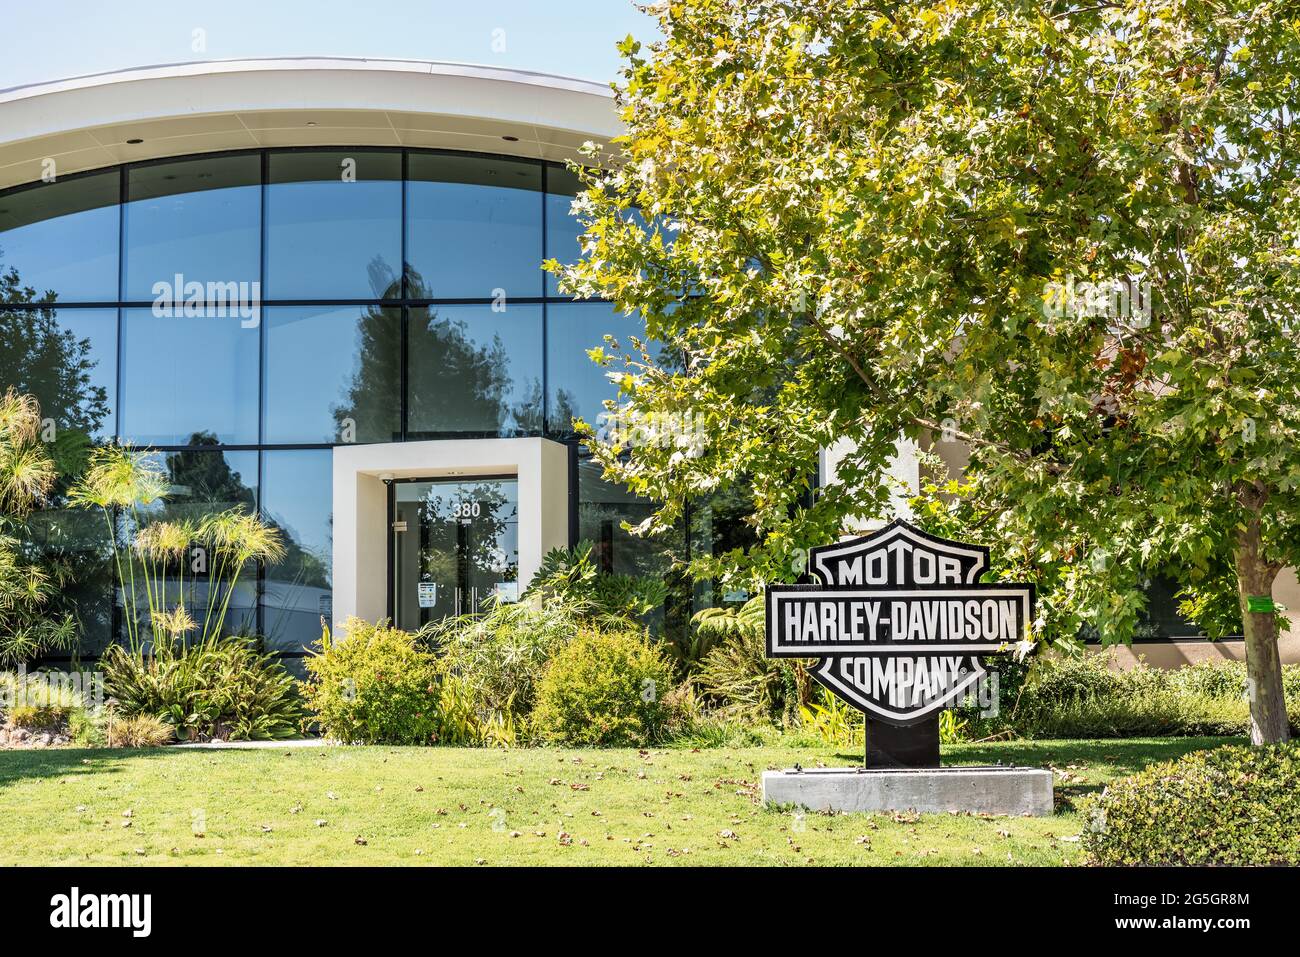 Sep 26, 2020 Mountain View / CA / USA - Motor Company Harley-Davidson headquarters in Silicon Valley; Harley-Davidson, Inc., H-D, or Harley, is an Ame Stock Photo